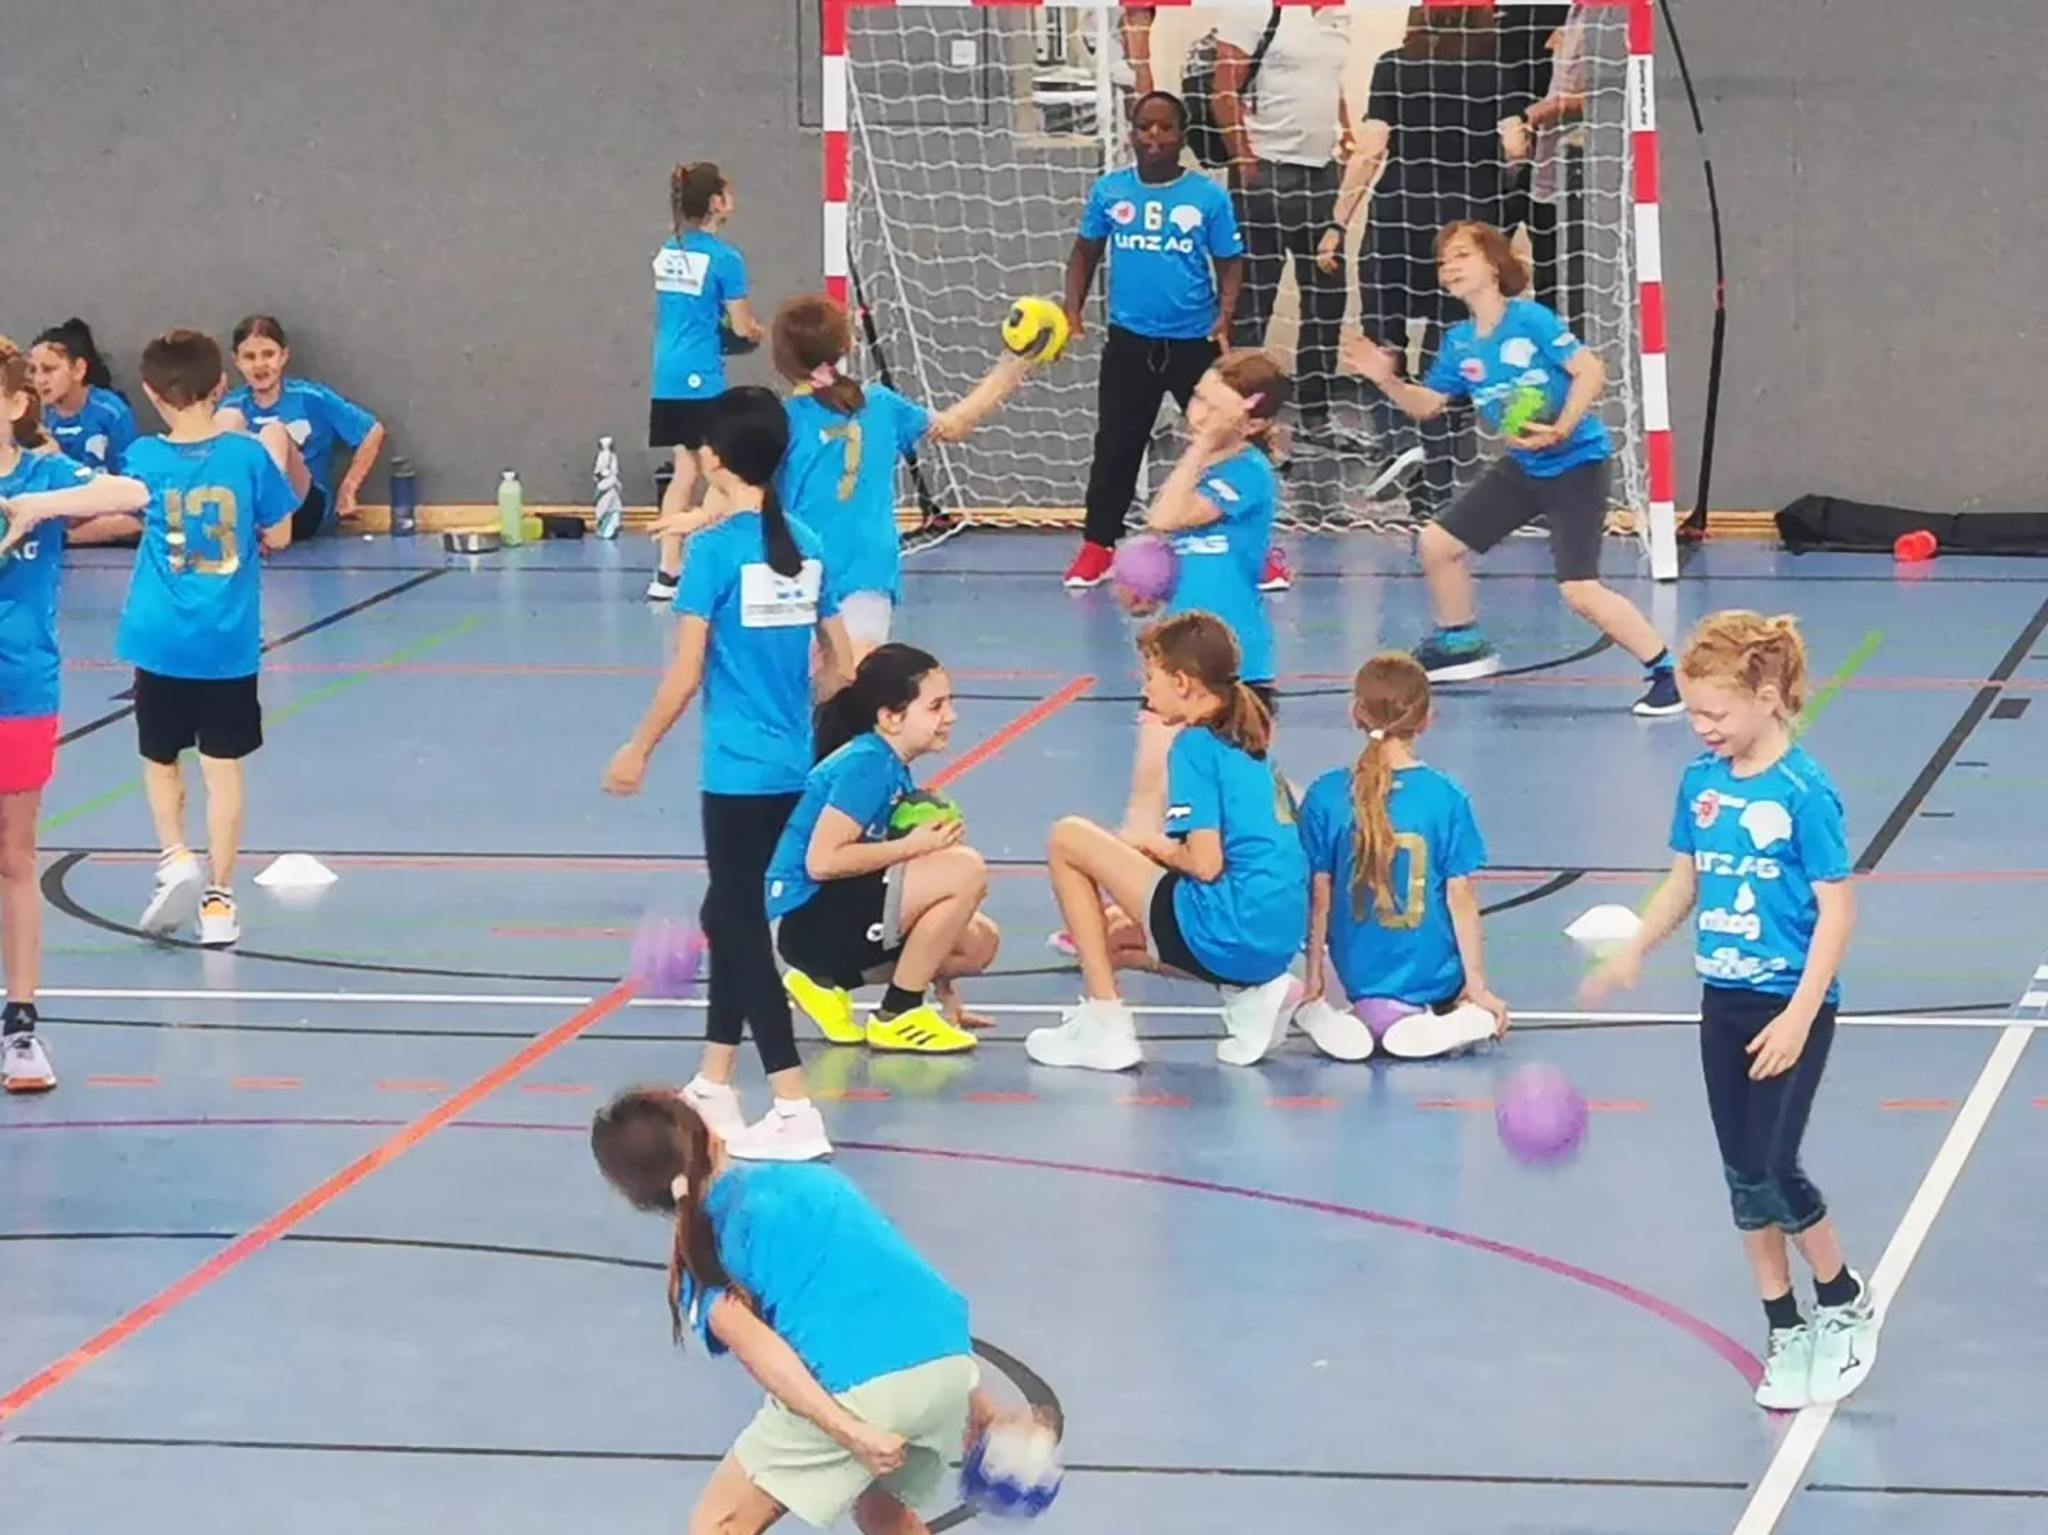 (c) Linzer Handball Youngsters